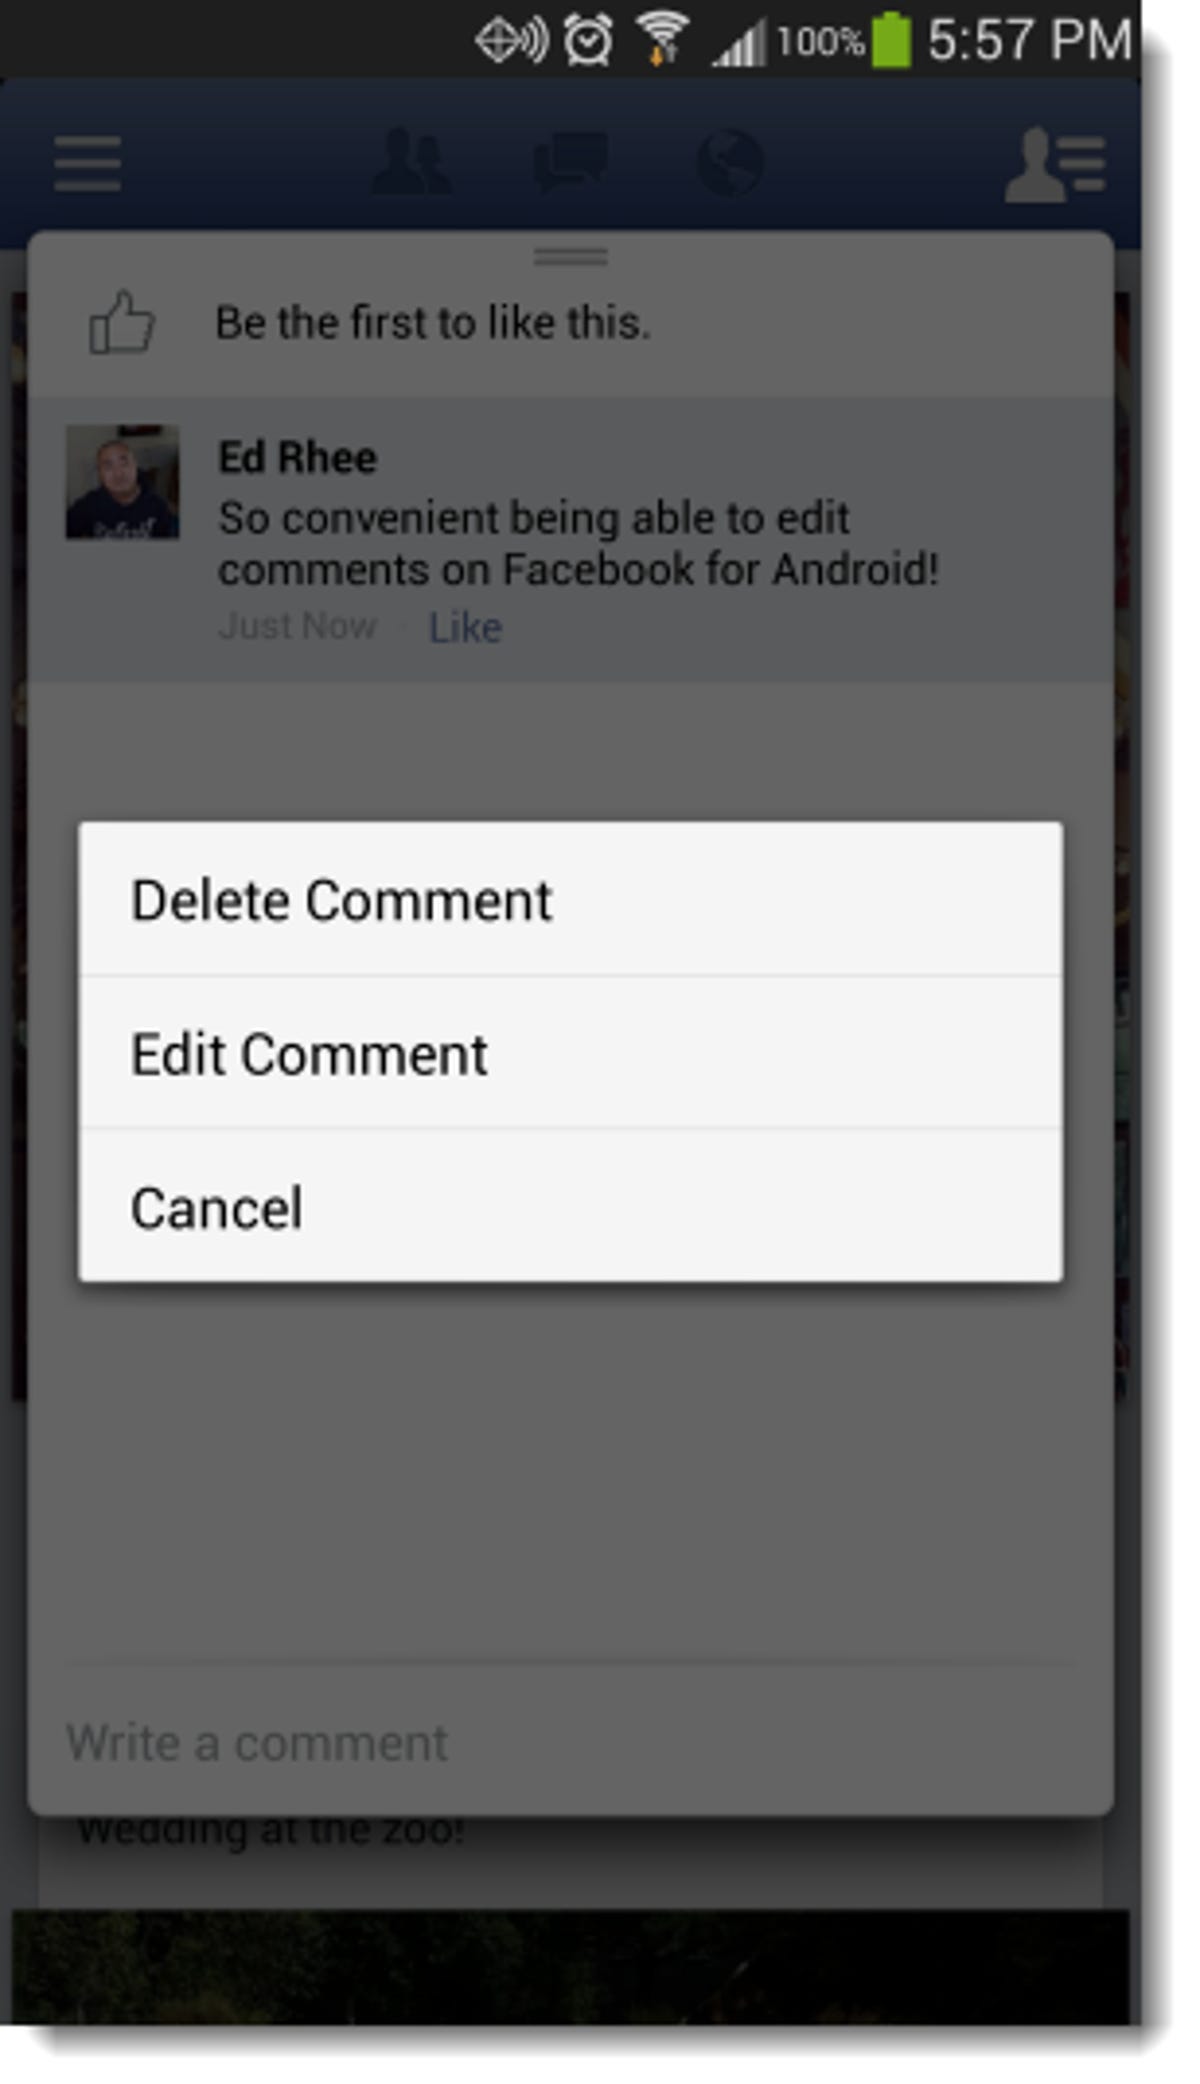 Edit comments on Facebook for Android